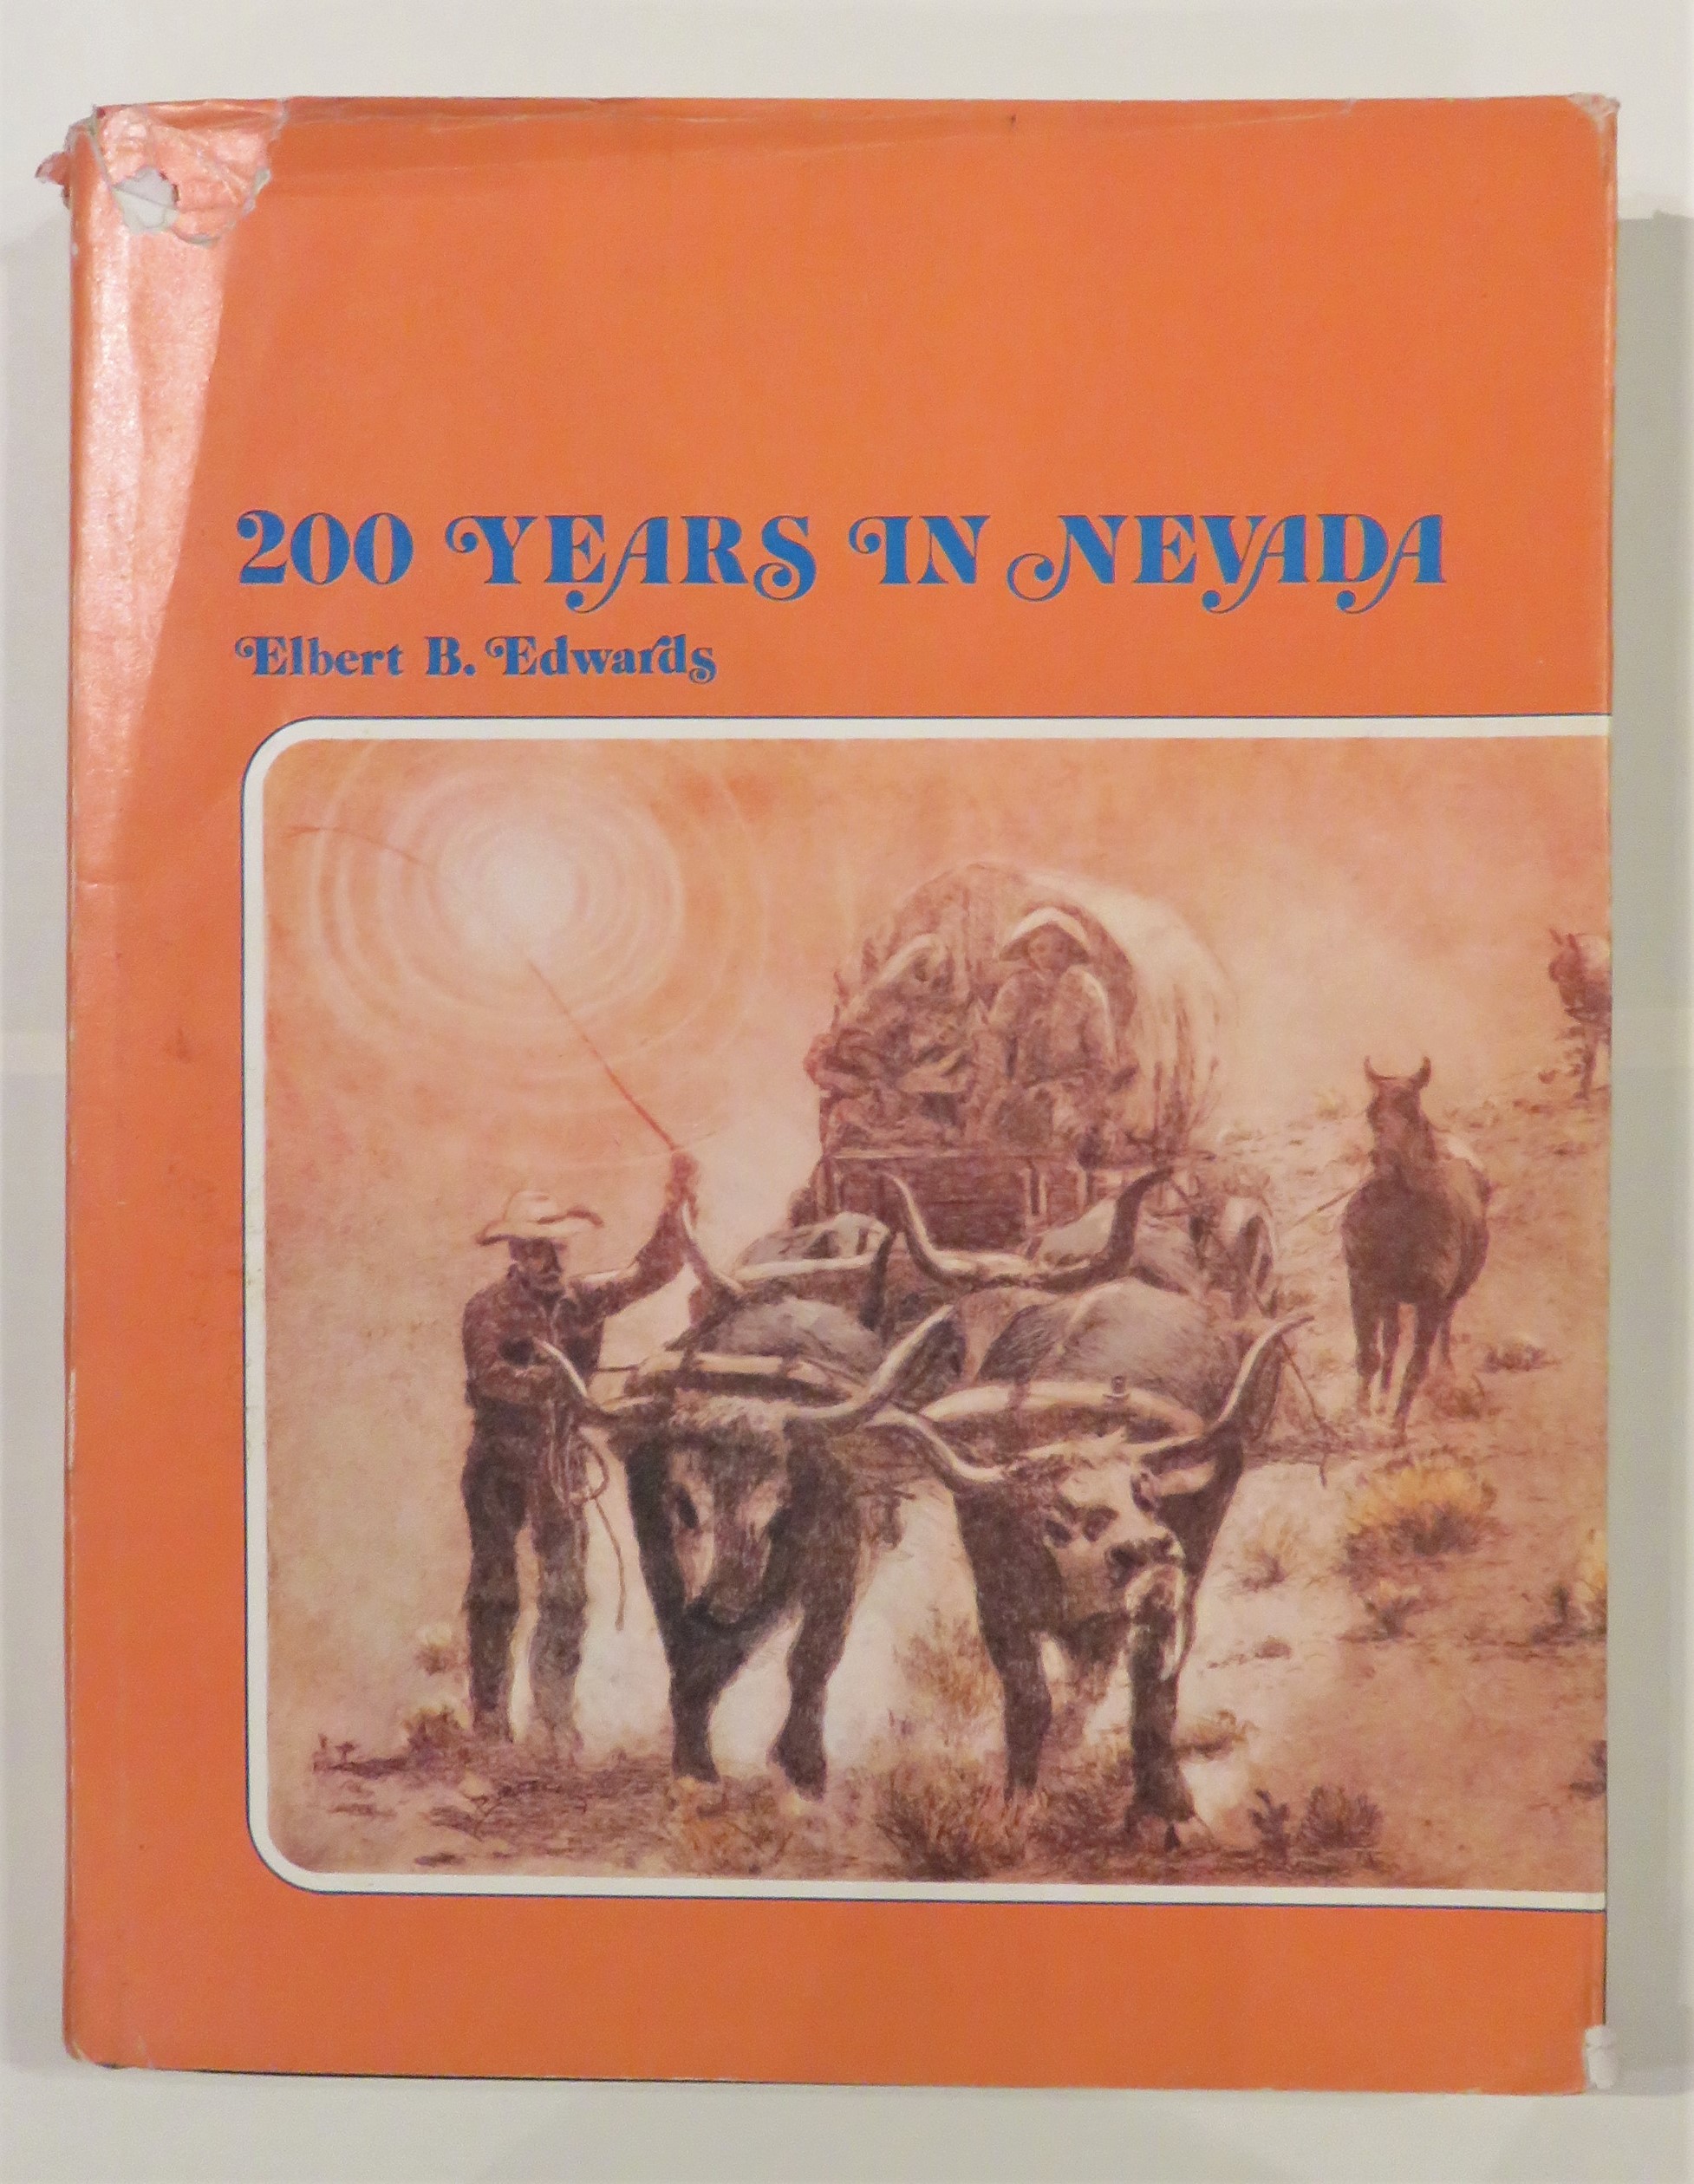 200 years in Nevada 